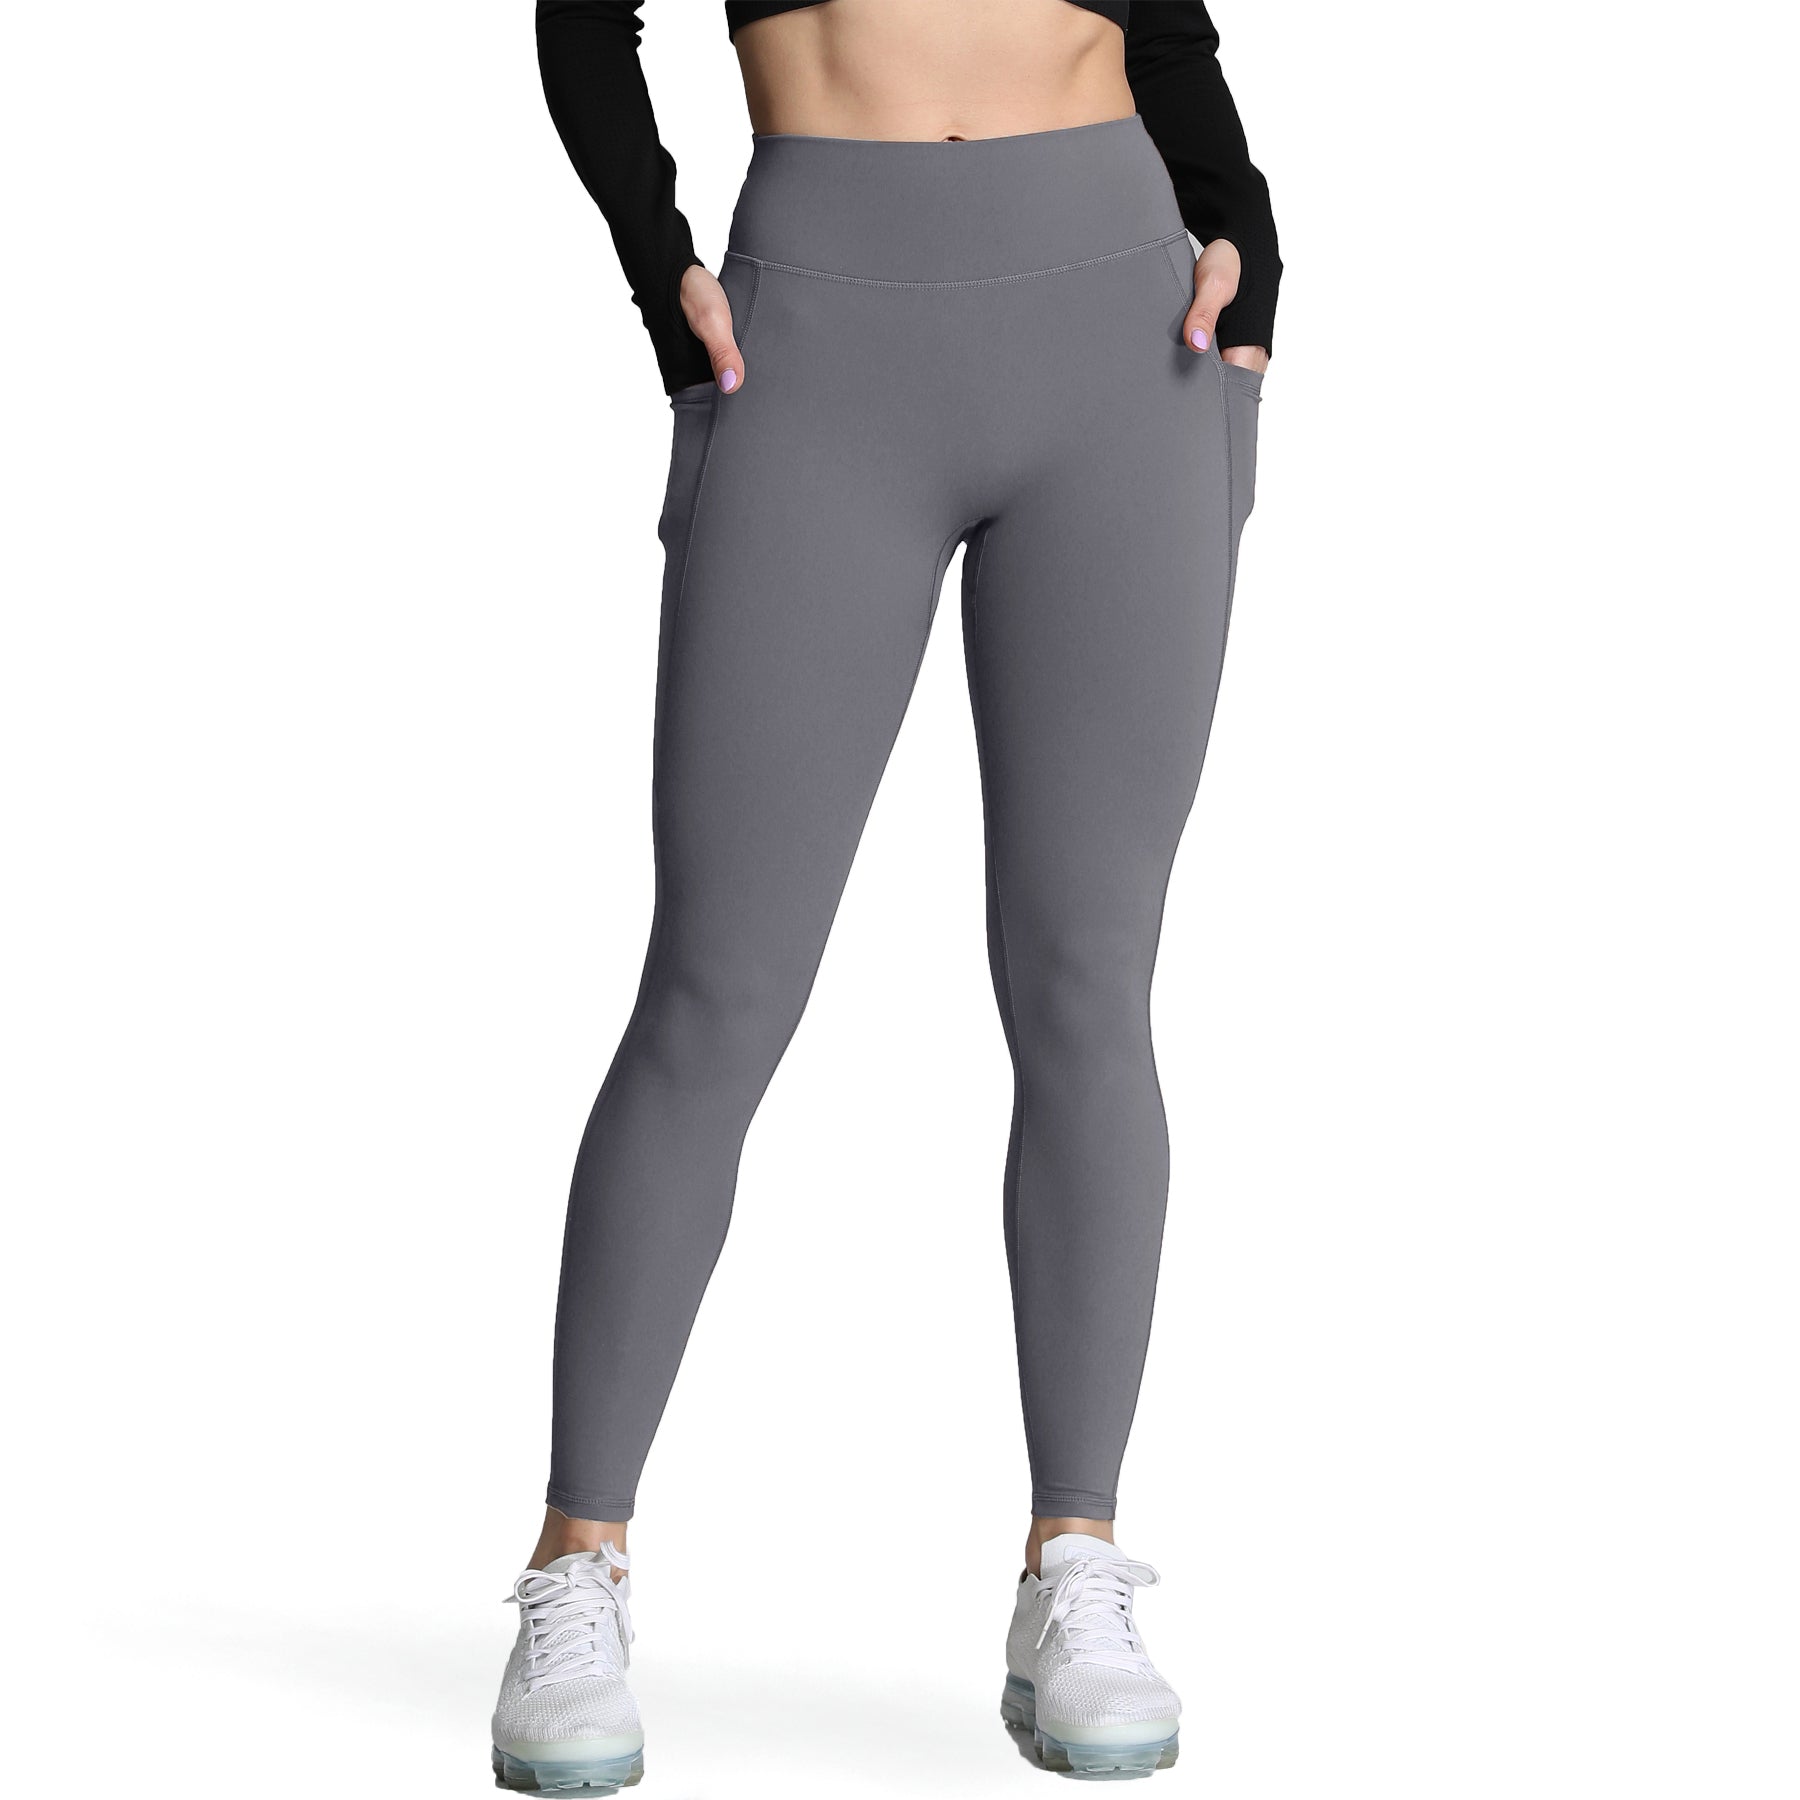 Aoxjox Trinity High Waisted Yoga Pants with Pockets for Women Tummy Control  Cross-Waist Crossover Workout Leggings, B Iron Grey (Regular Waistband)